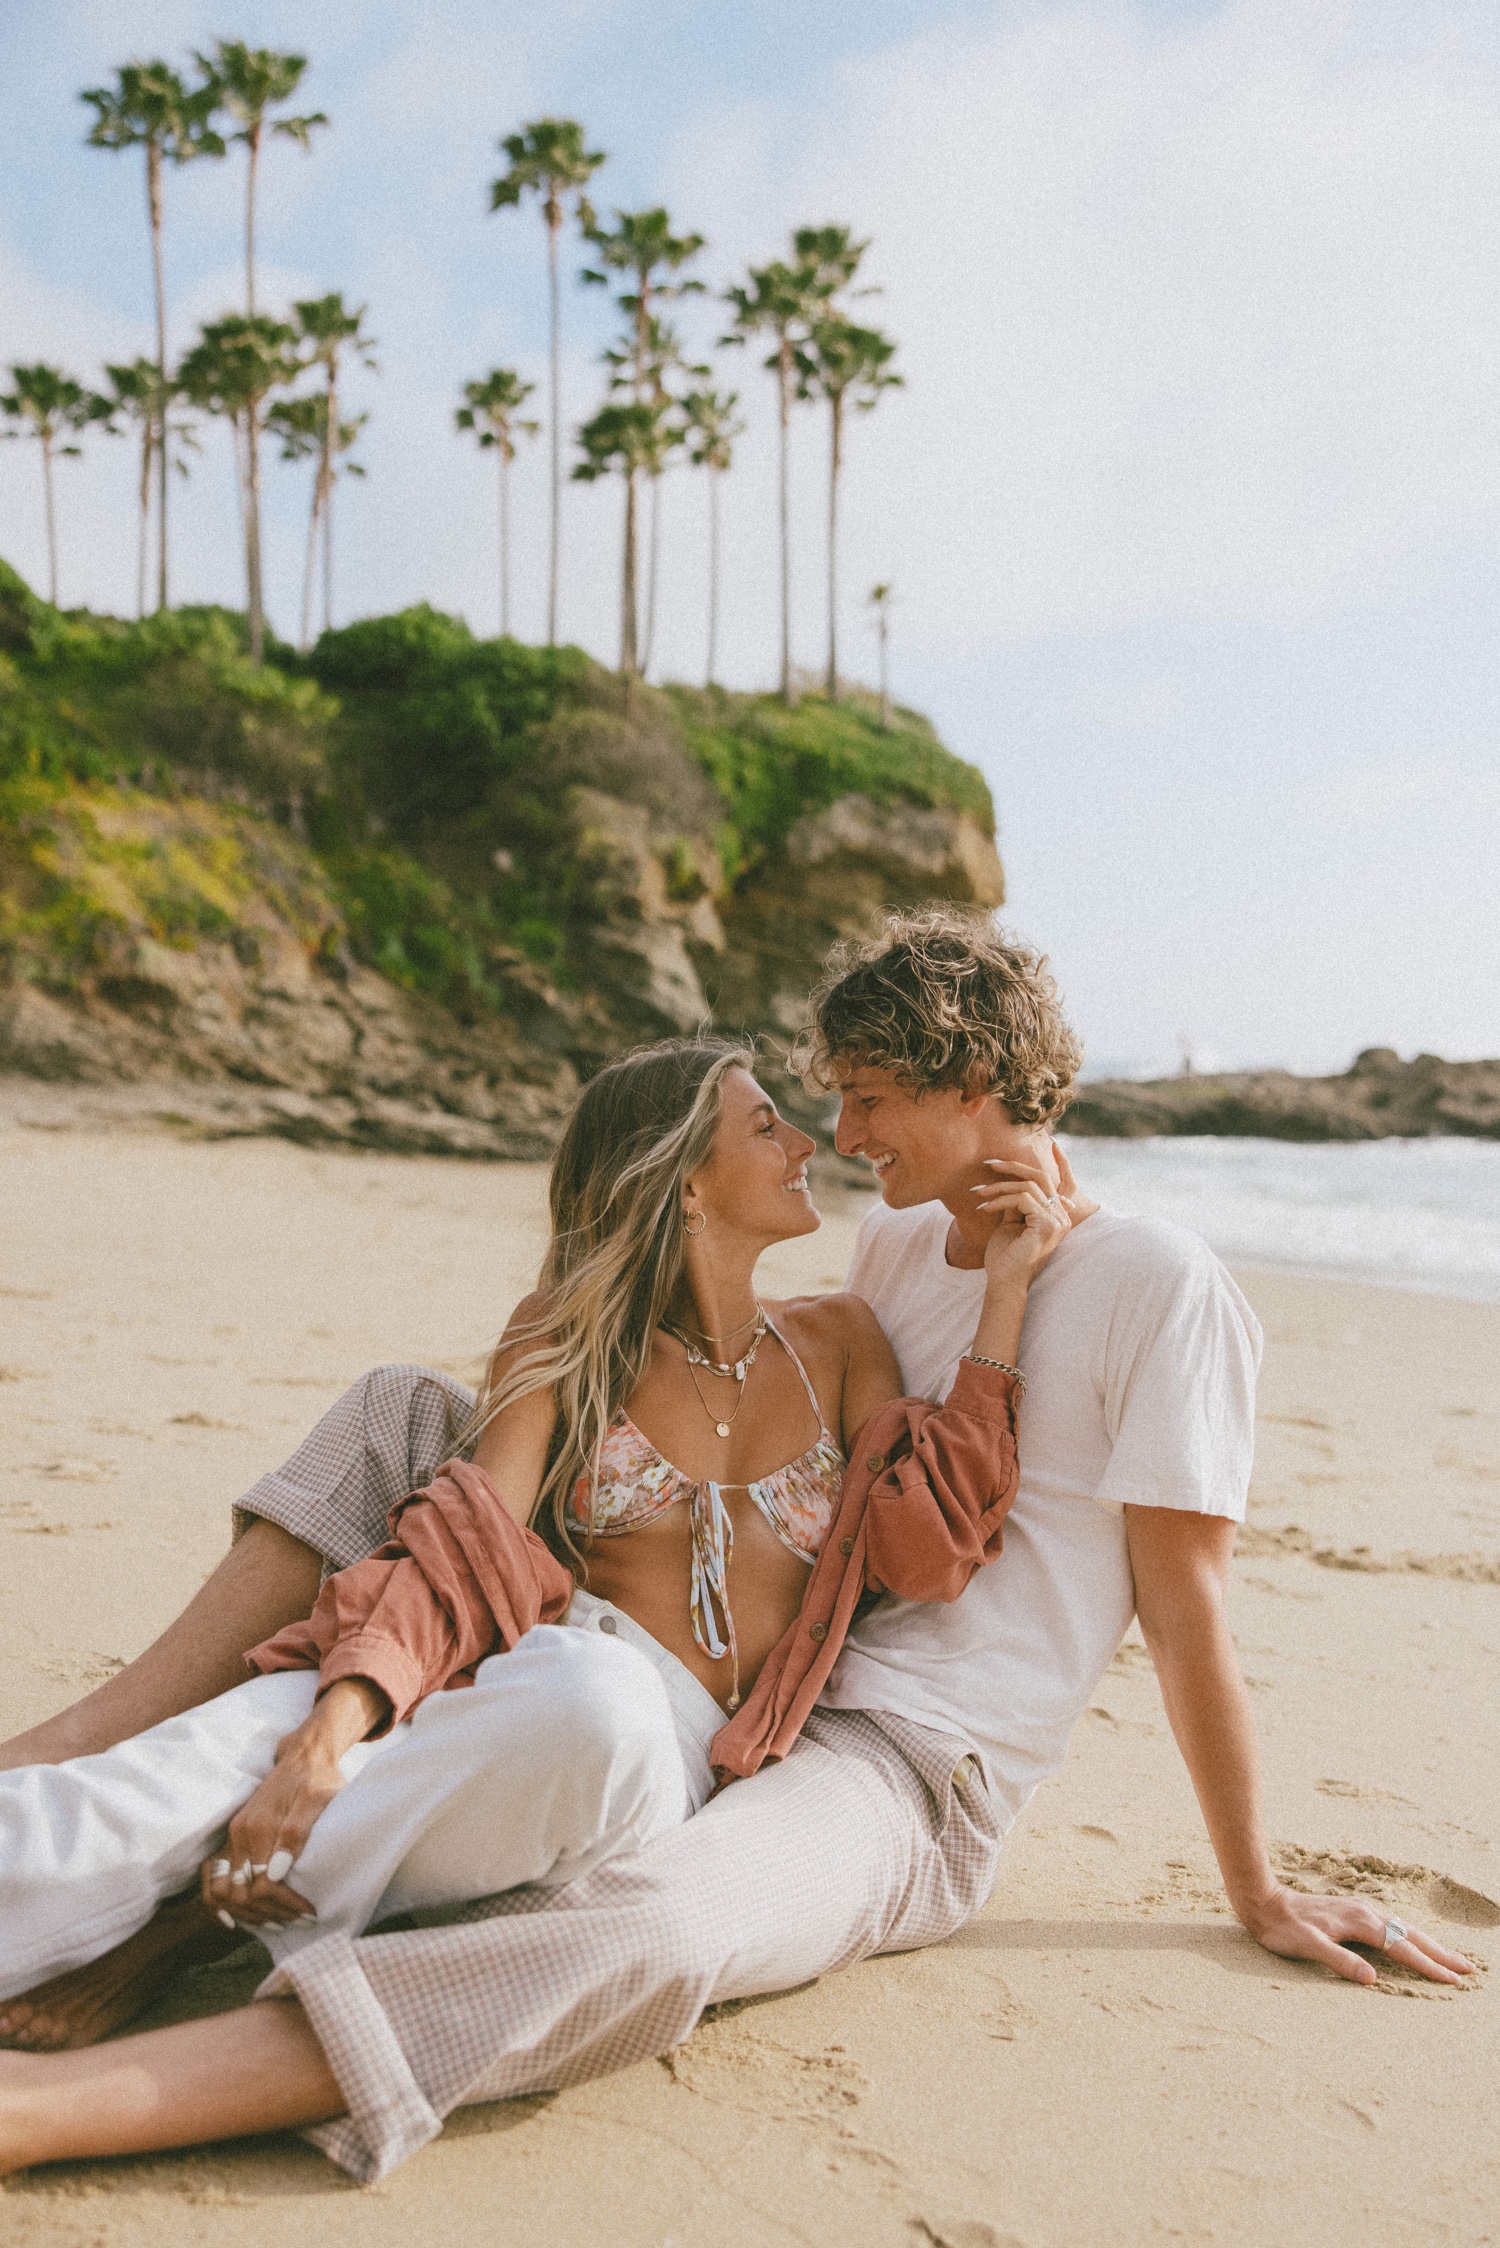 Couple beach pose inspo! 🌊 | Gallery posted by Anna Schmidt | Lemon8